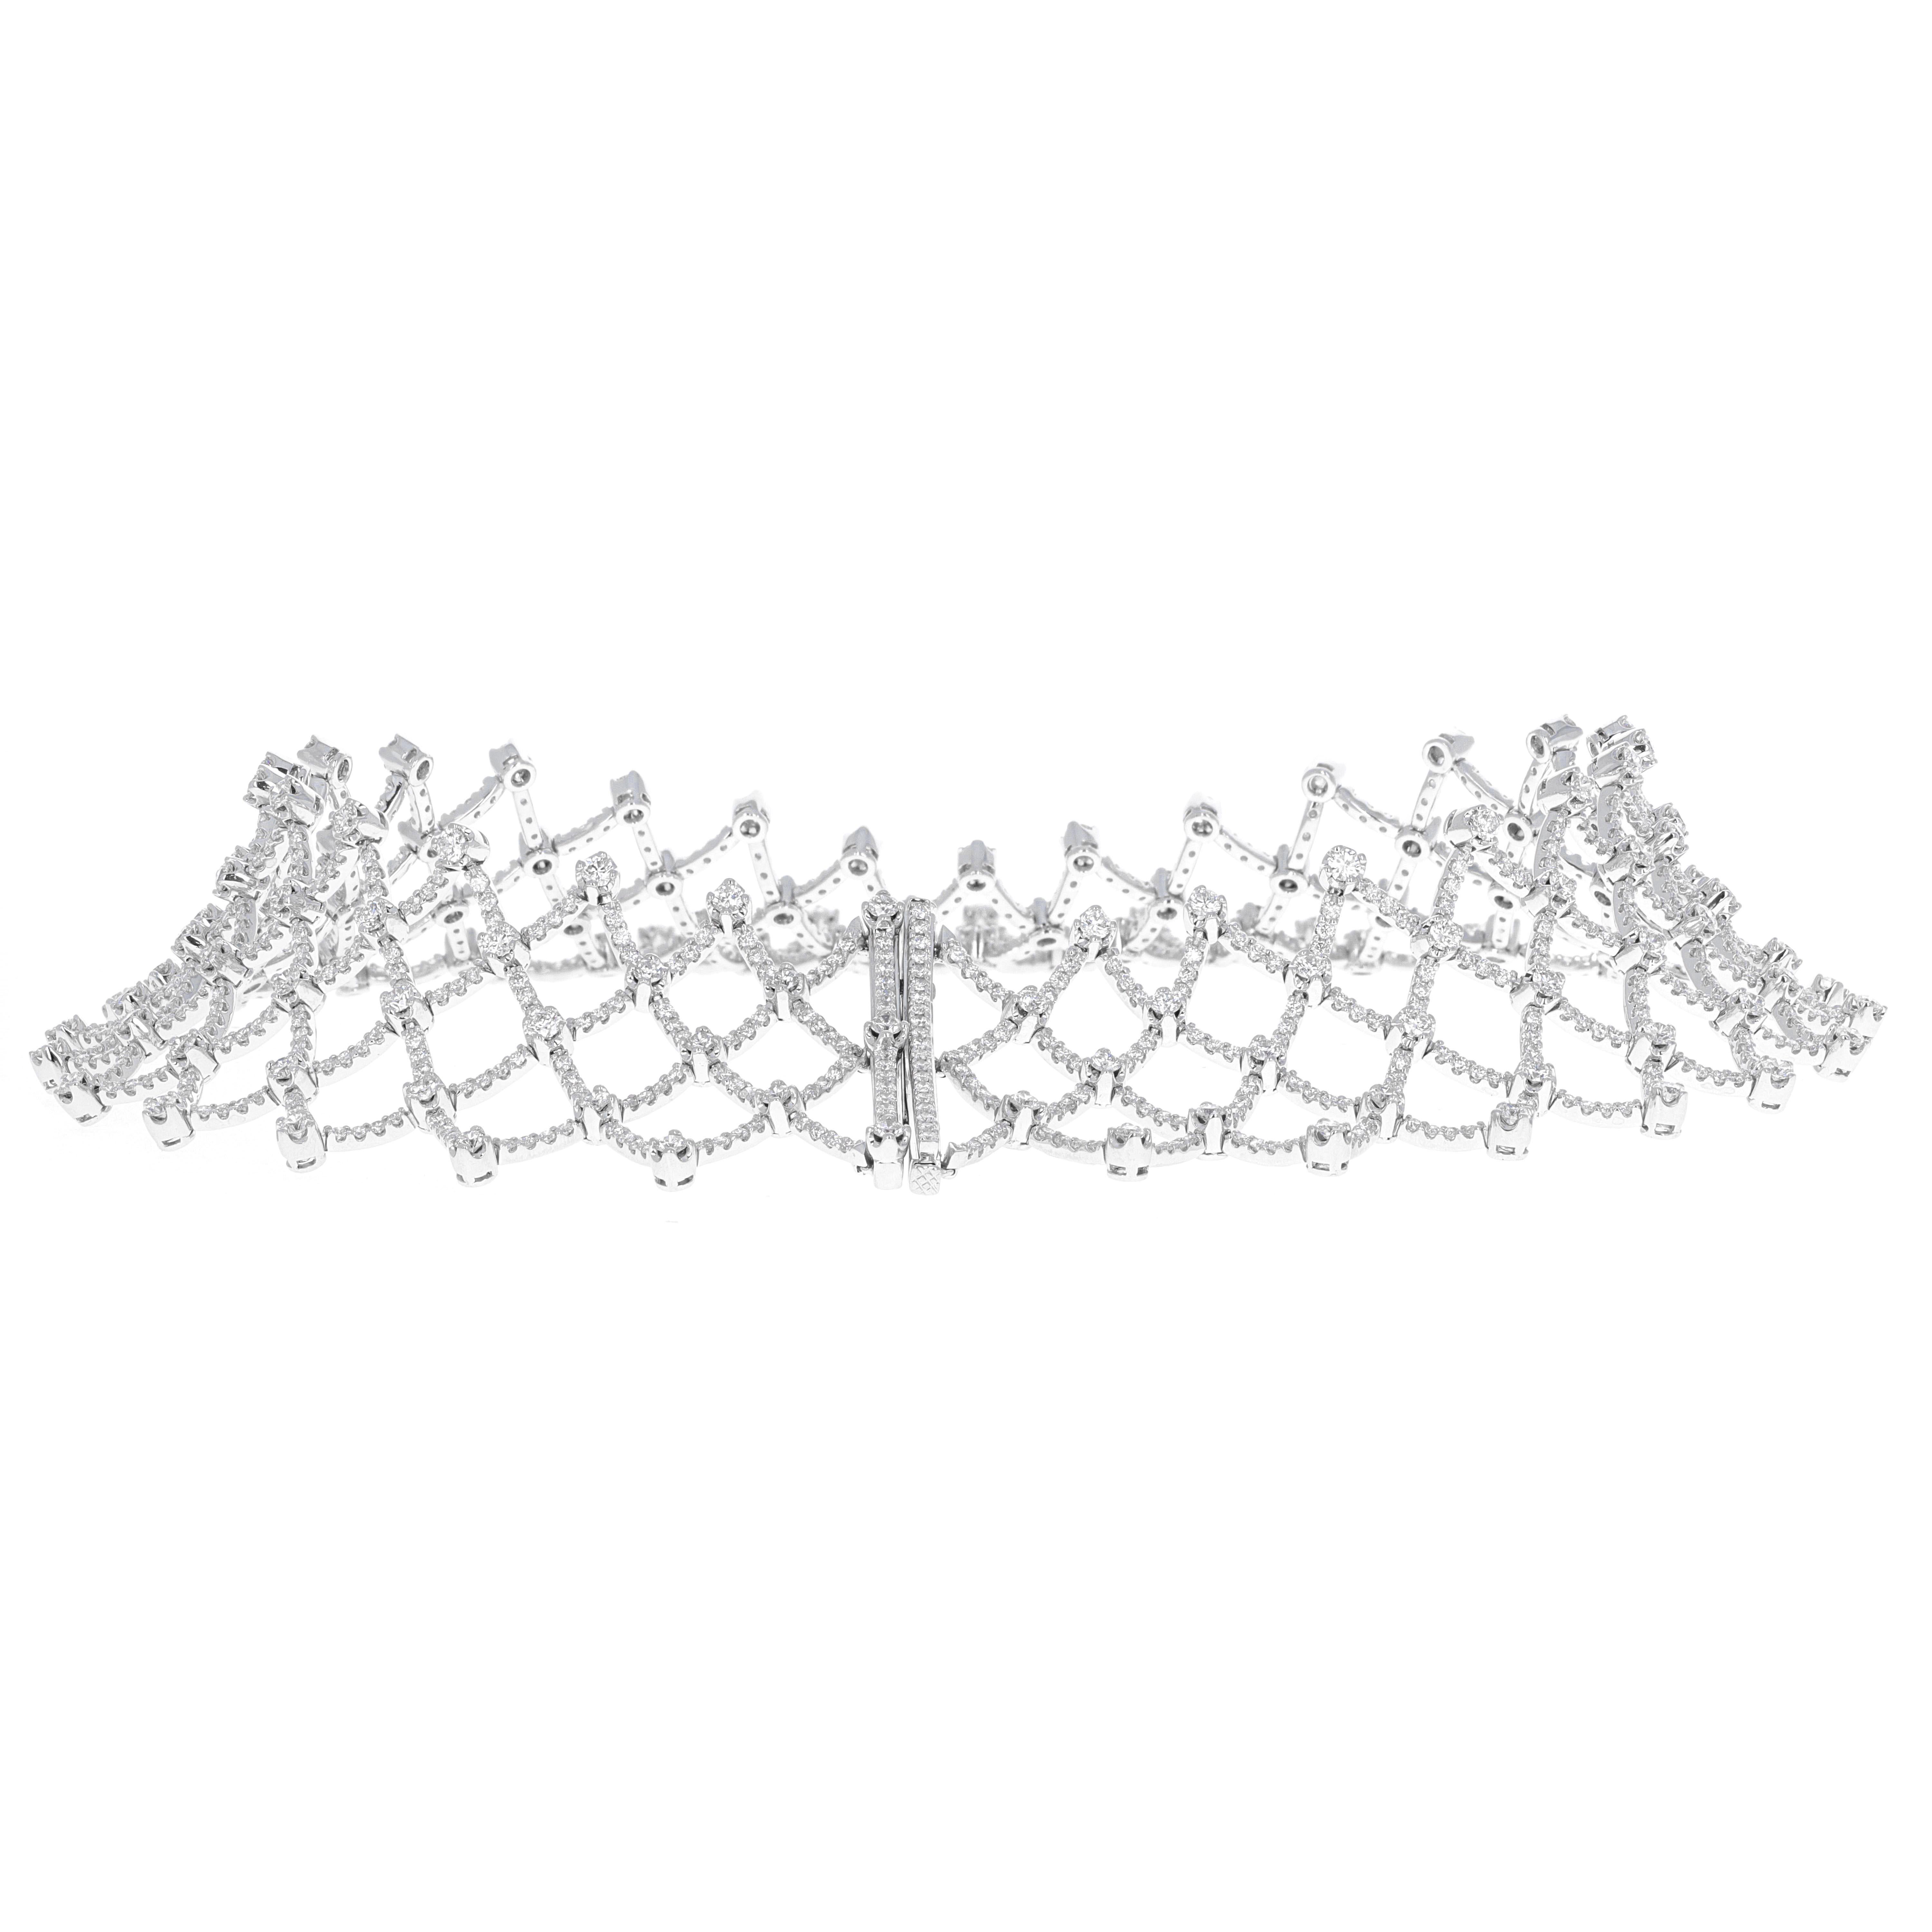 Lugano diamond collar necklace that can also be worn as a tiara. This piece is timeless and very versitile. It is made in 18 karat white gold and has great movement and flexibility. There is 28.32 carats total weight of white eye clean diamonds. The